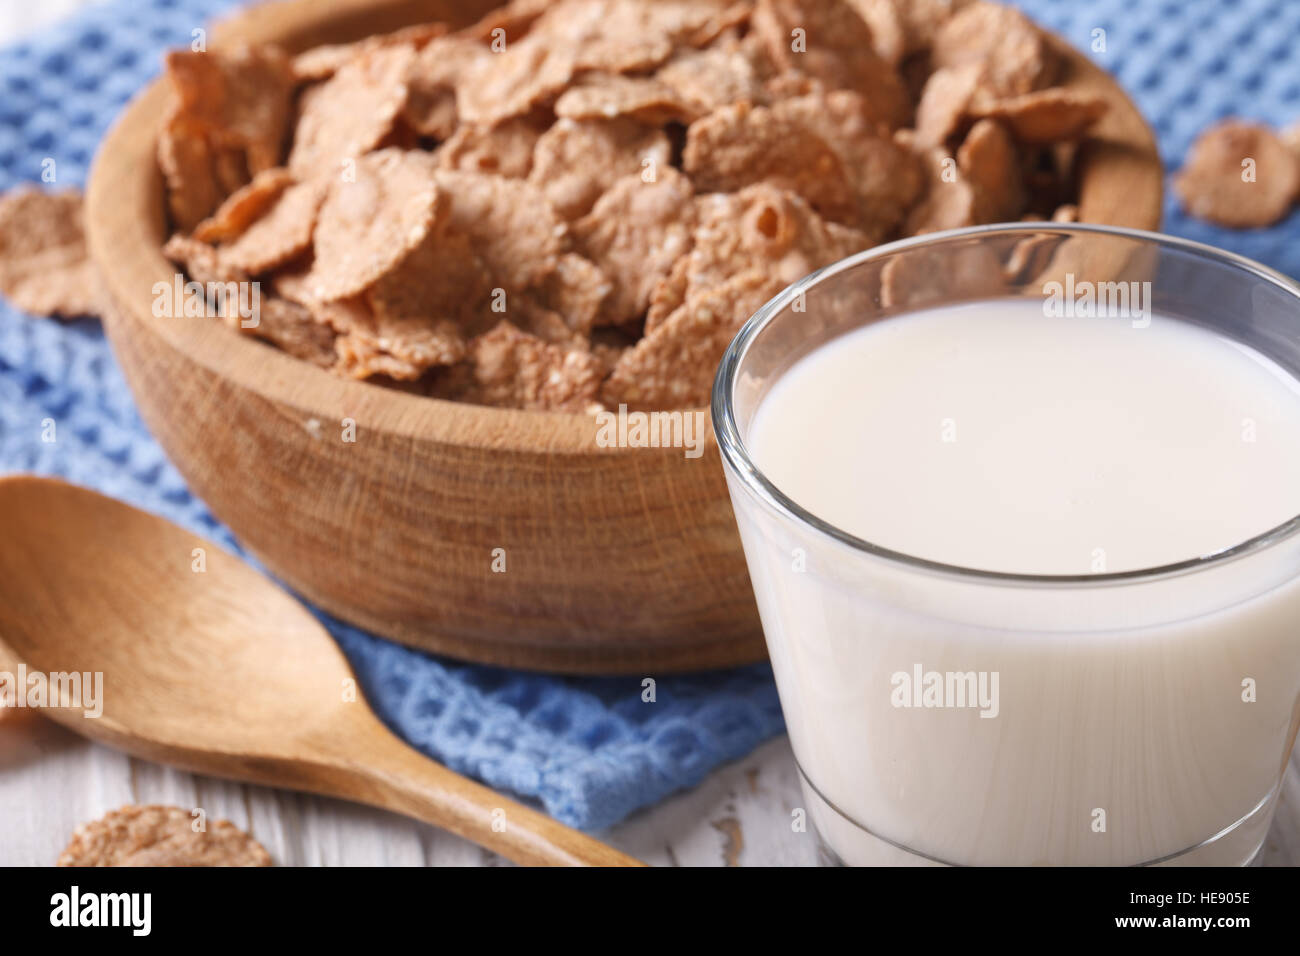 Healthy bran flakes in a wooden bowl and milk close-up. horizontal, rustic style Stock Photo